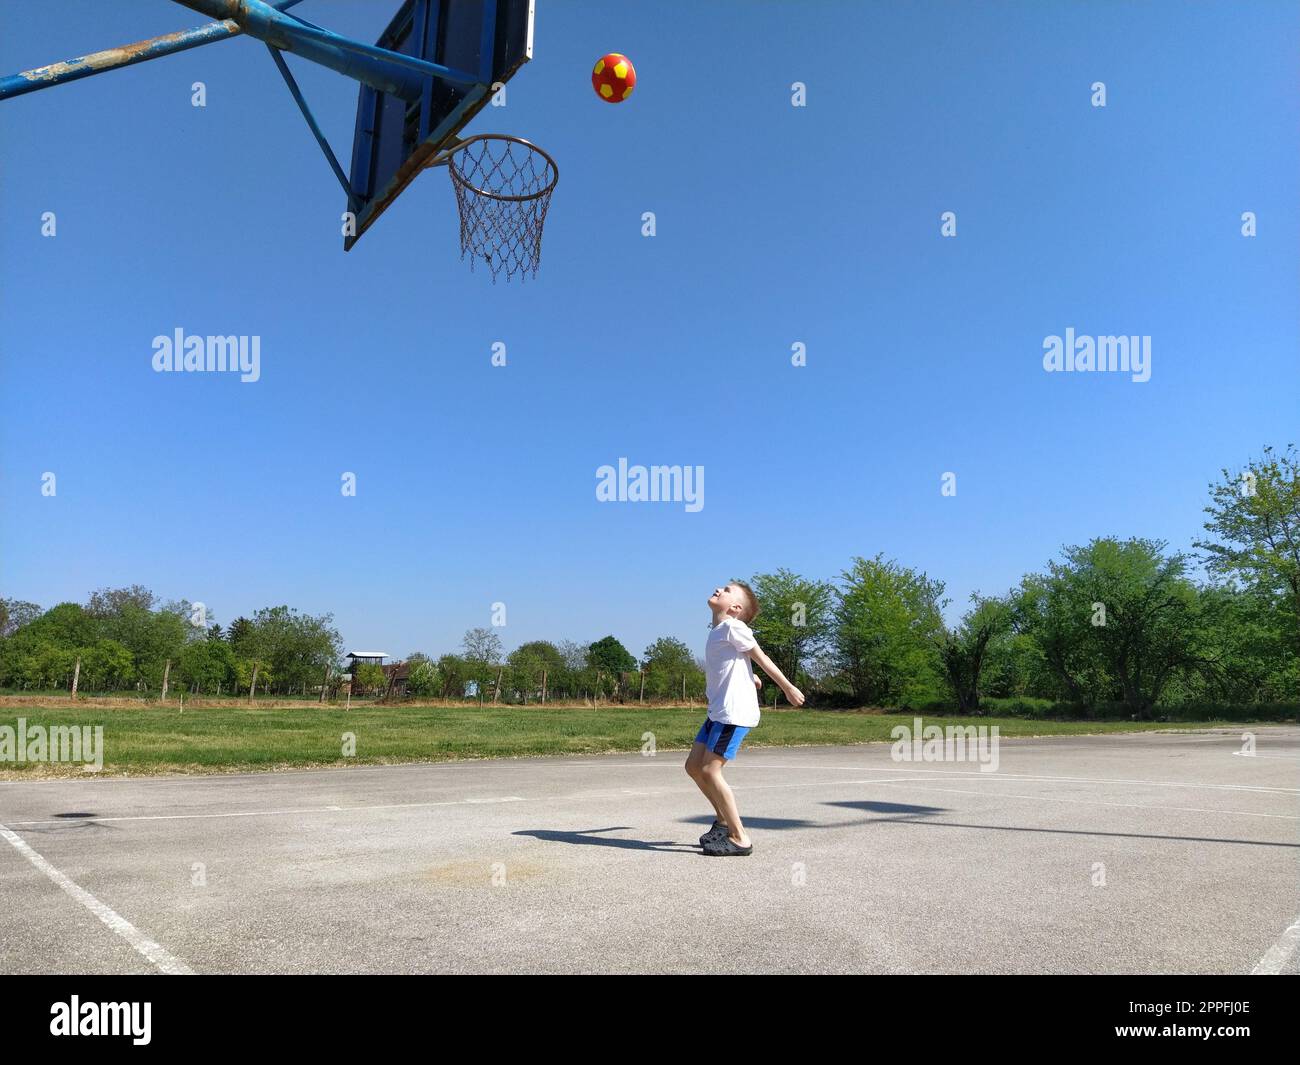 The boy throws the ball into the basketball net. The child plays with a ball on the playground. Free space for text. Blue sky in the background. Child with blond hair. Stock Photo